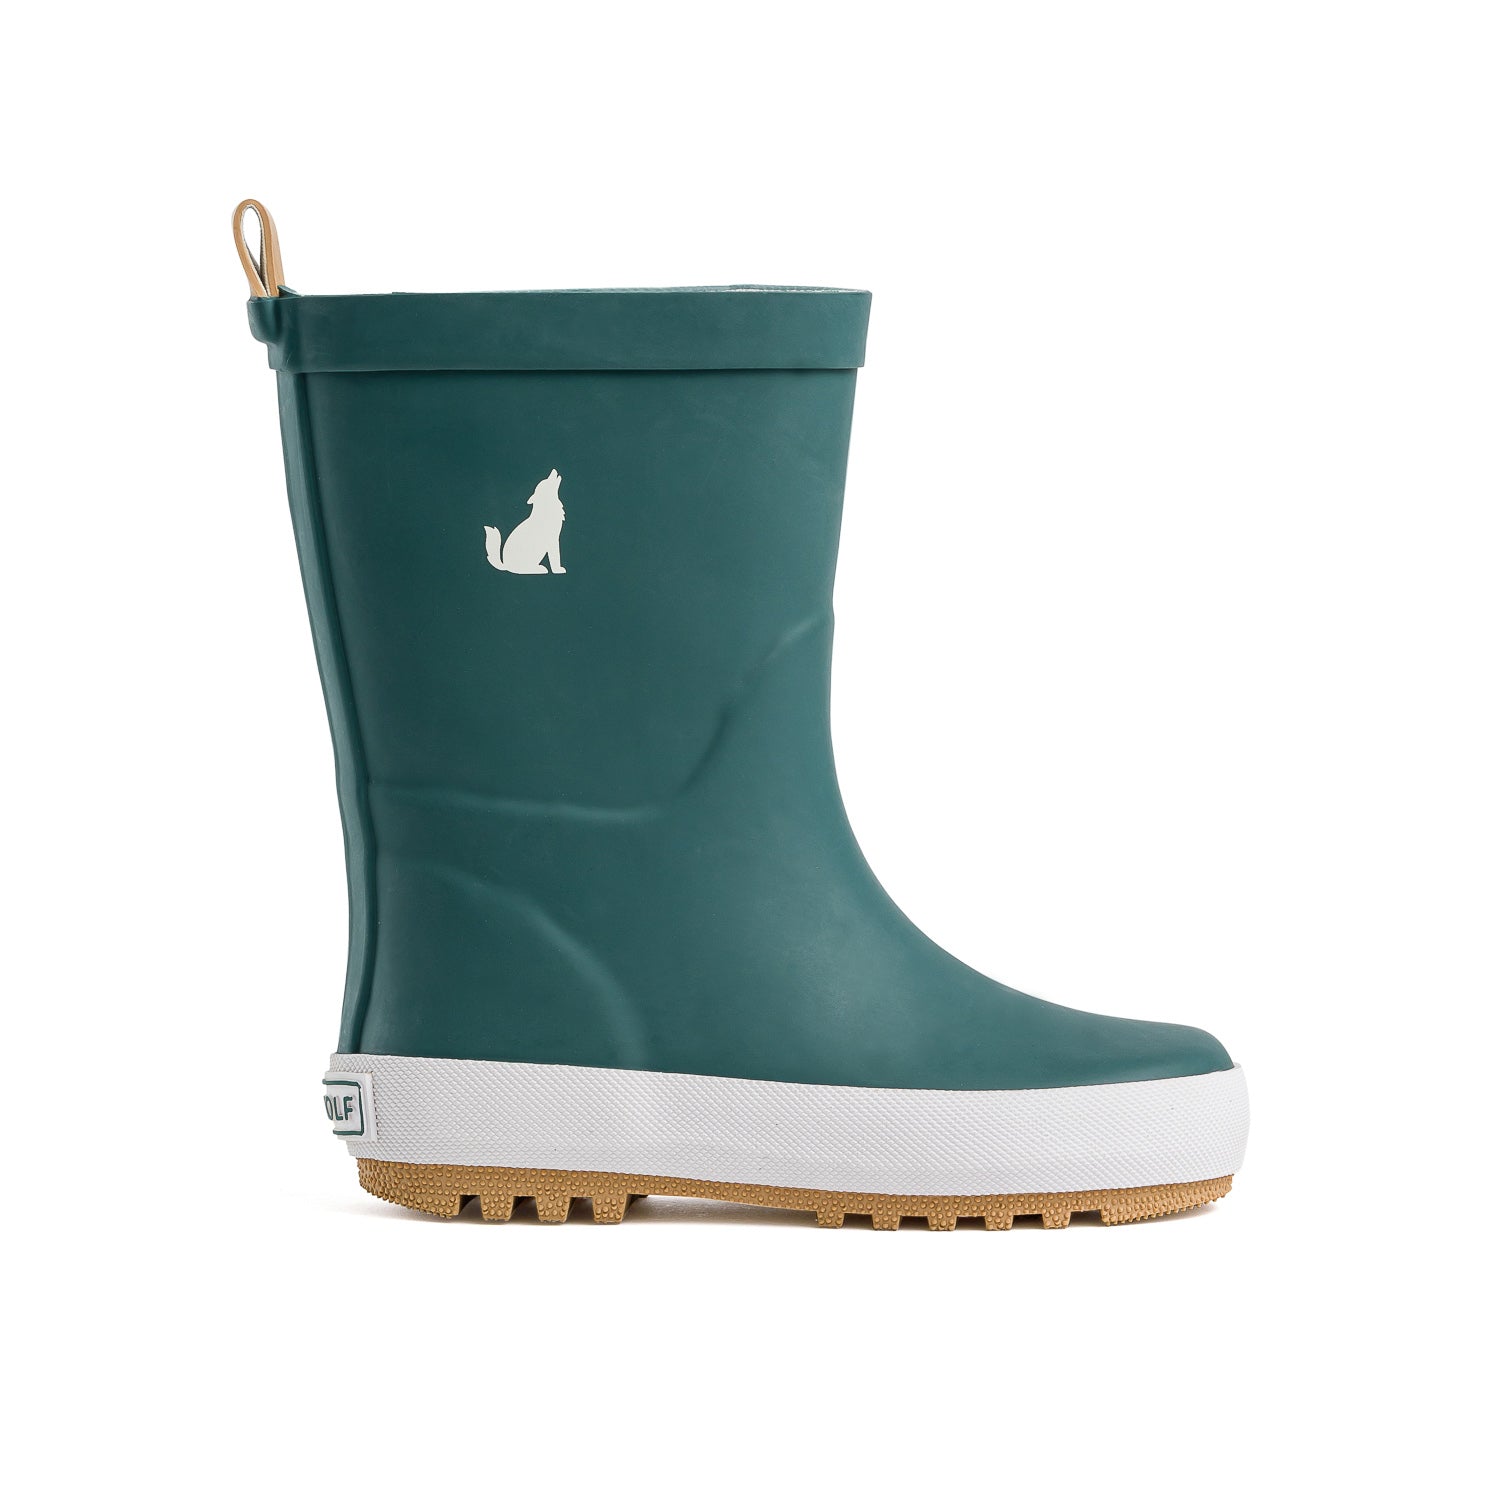 Crywolf rainbbots gumboots for kids - Angus and Dudley